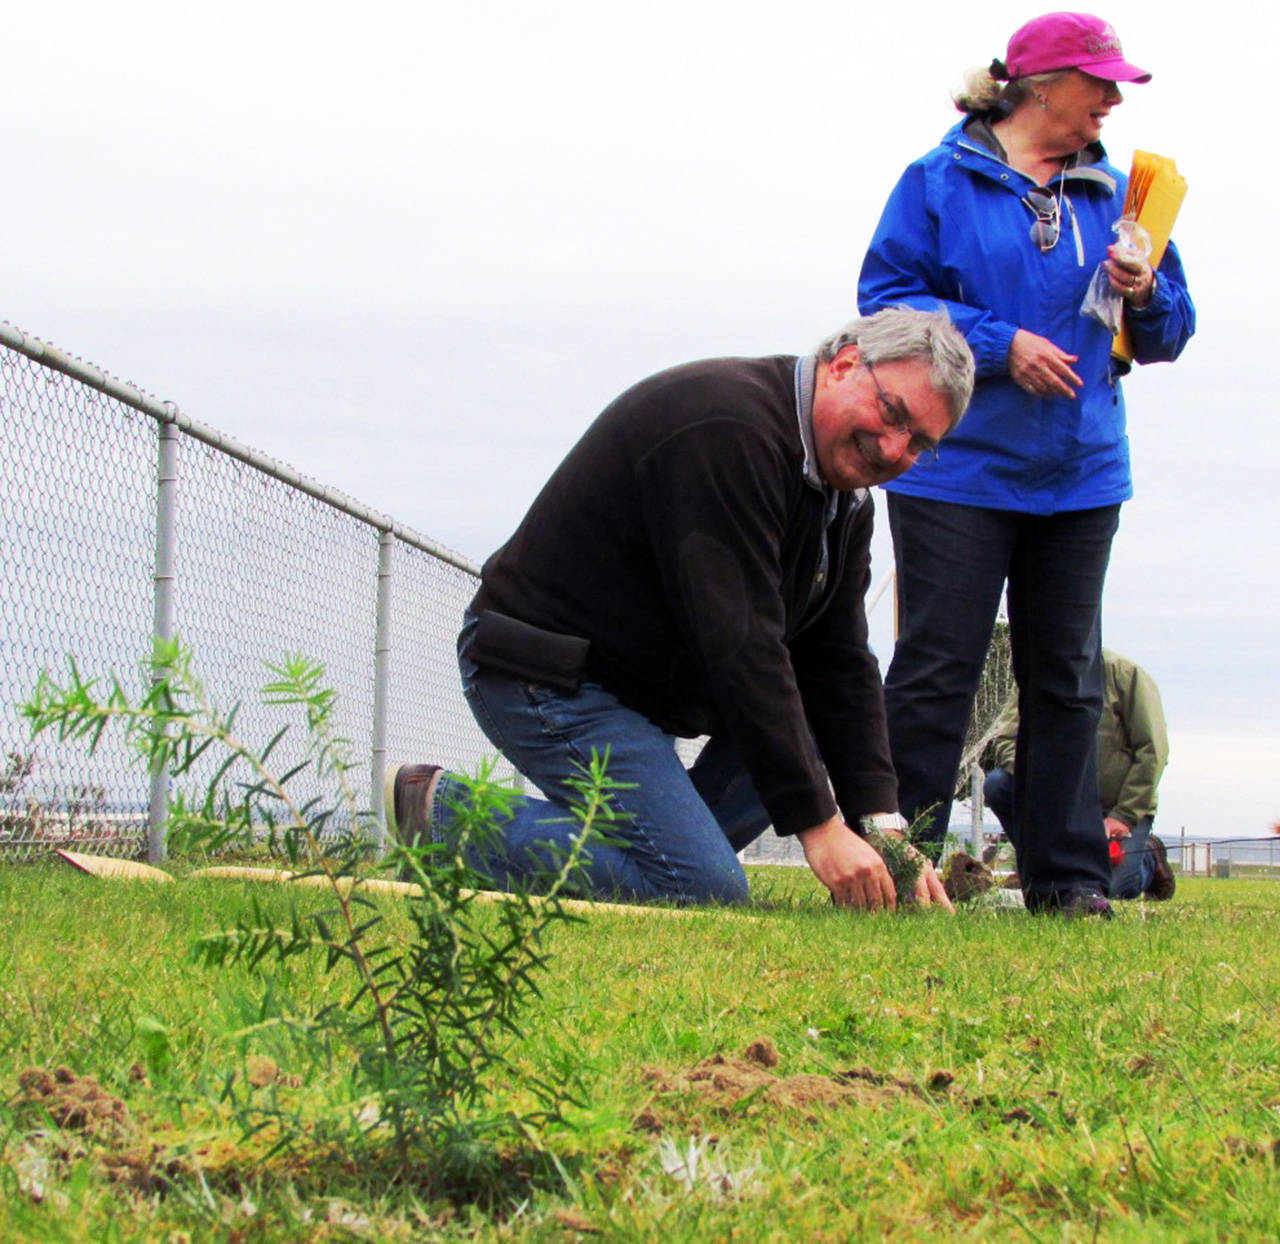 Scott D. Johnston photo: Councilman Jon Martin plants a tree at North Bay Park under the supervision of Nancy Eldridge of the Coastal Interpretive Center. Arbor Day was celebrated in Ocean Shores with tree plantings Friday at Ocean Shores Elementary School and Saturday at North Bay Park.